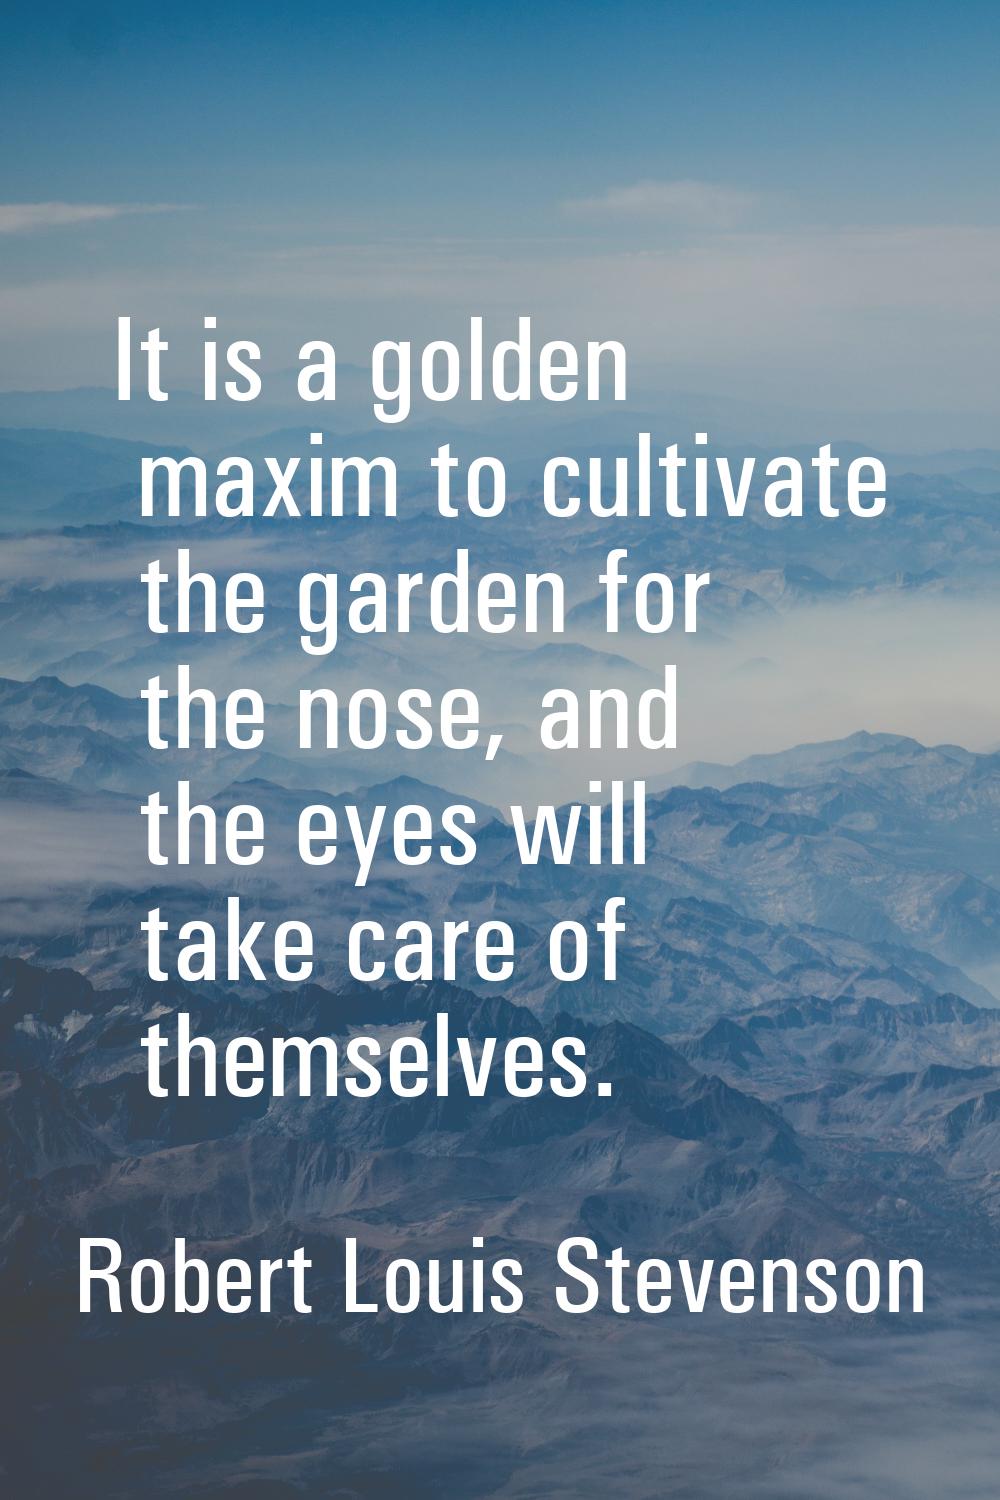 It is a golden maxim to cultivate the garden for the nose, and the eyes will take care of themselve